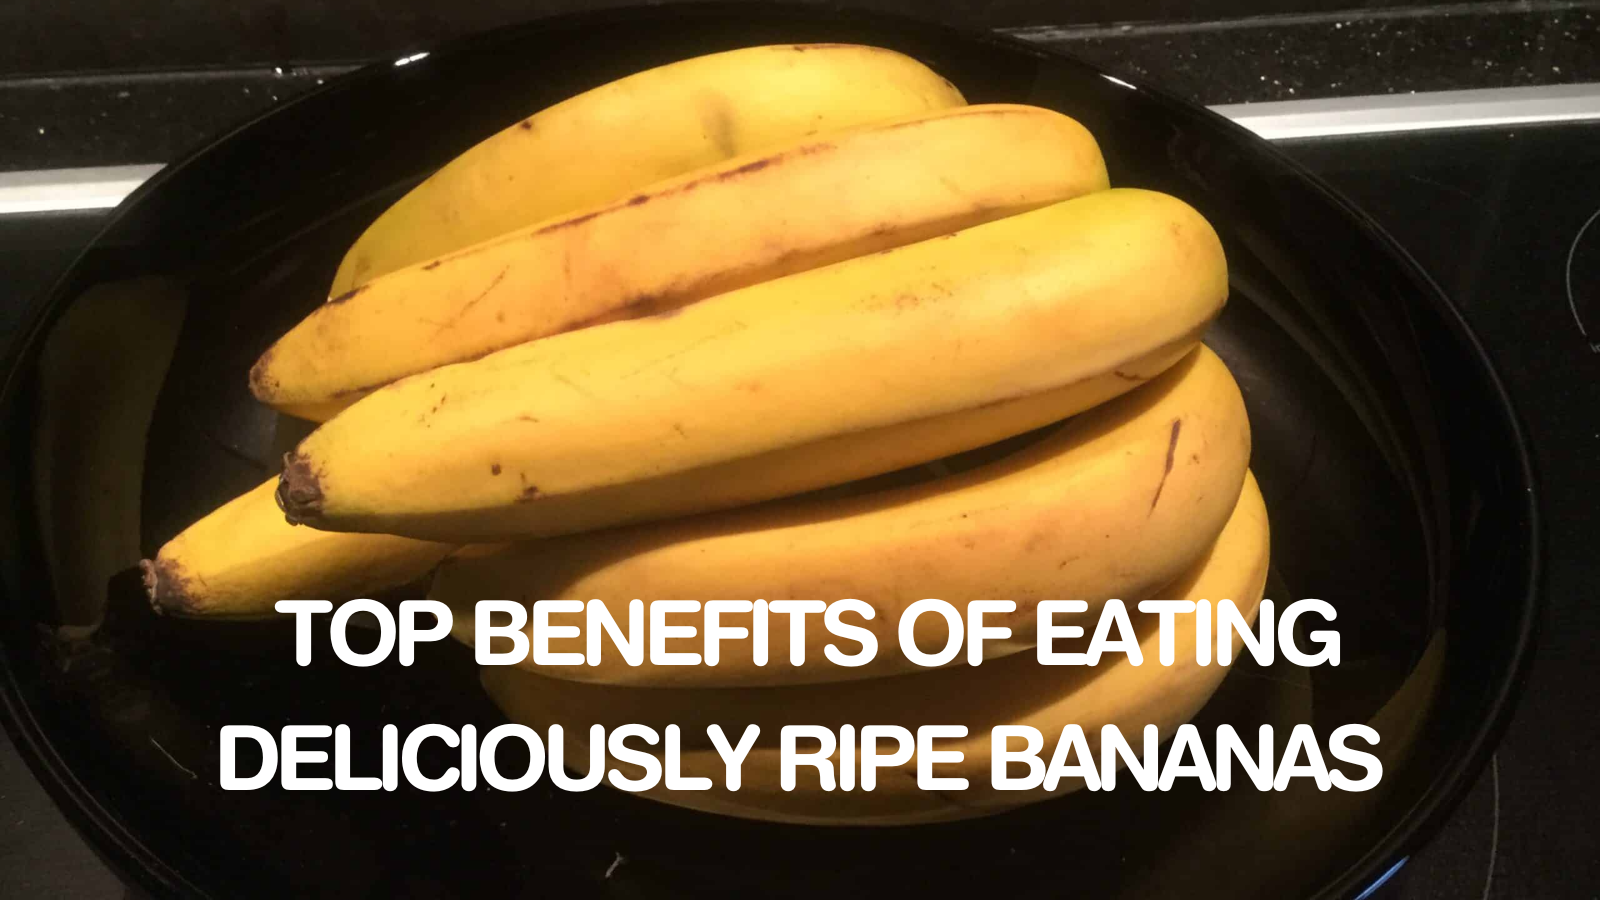 Top Benefits Of Eating Deliciously Ripe Bananas